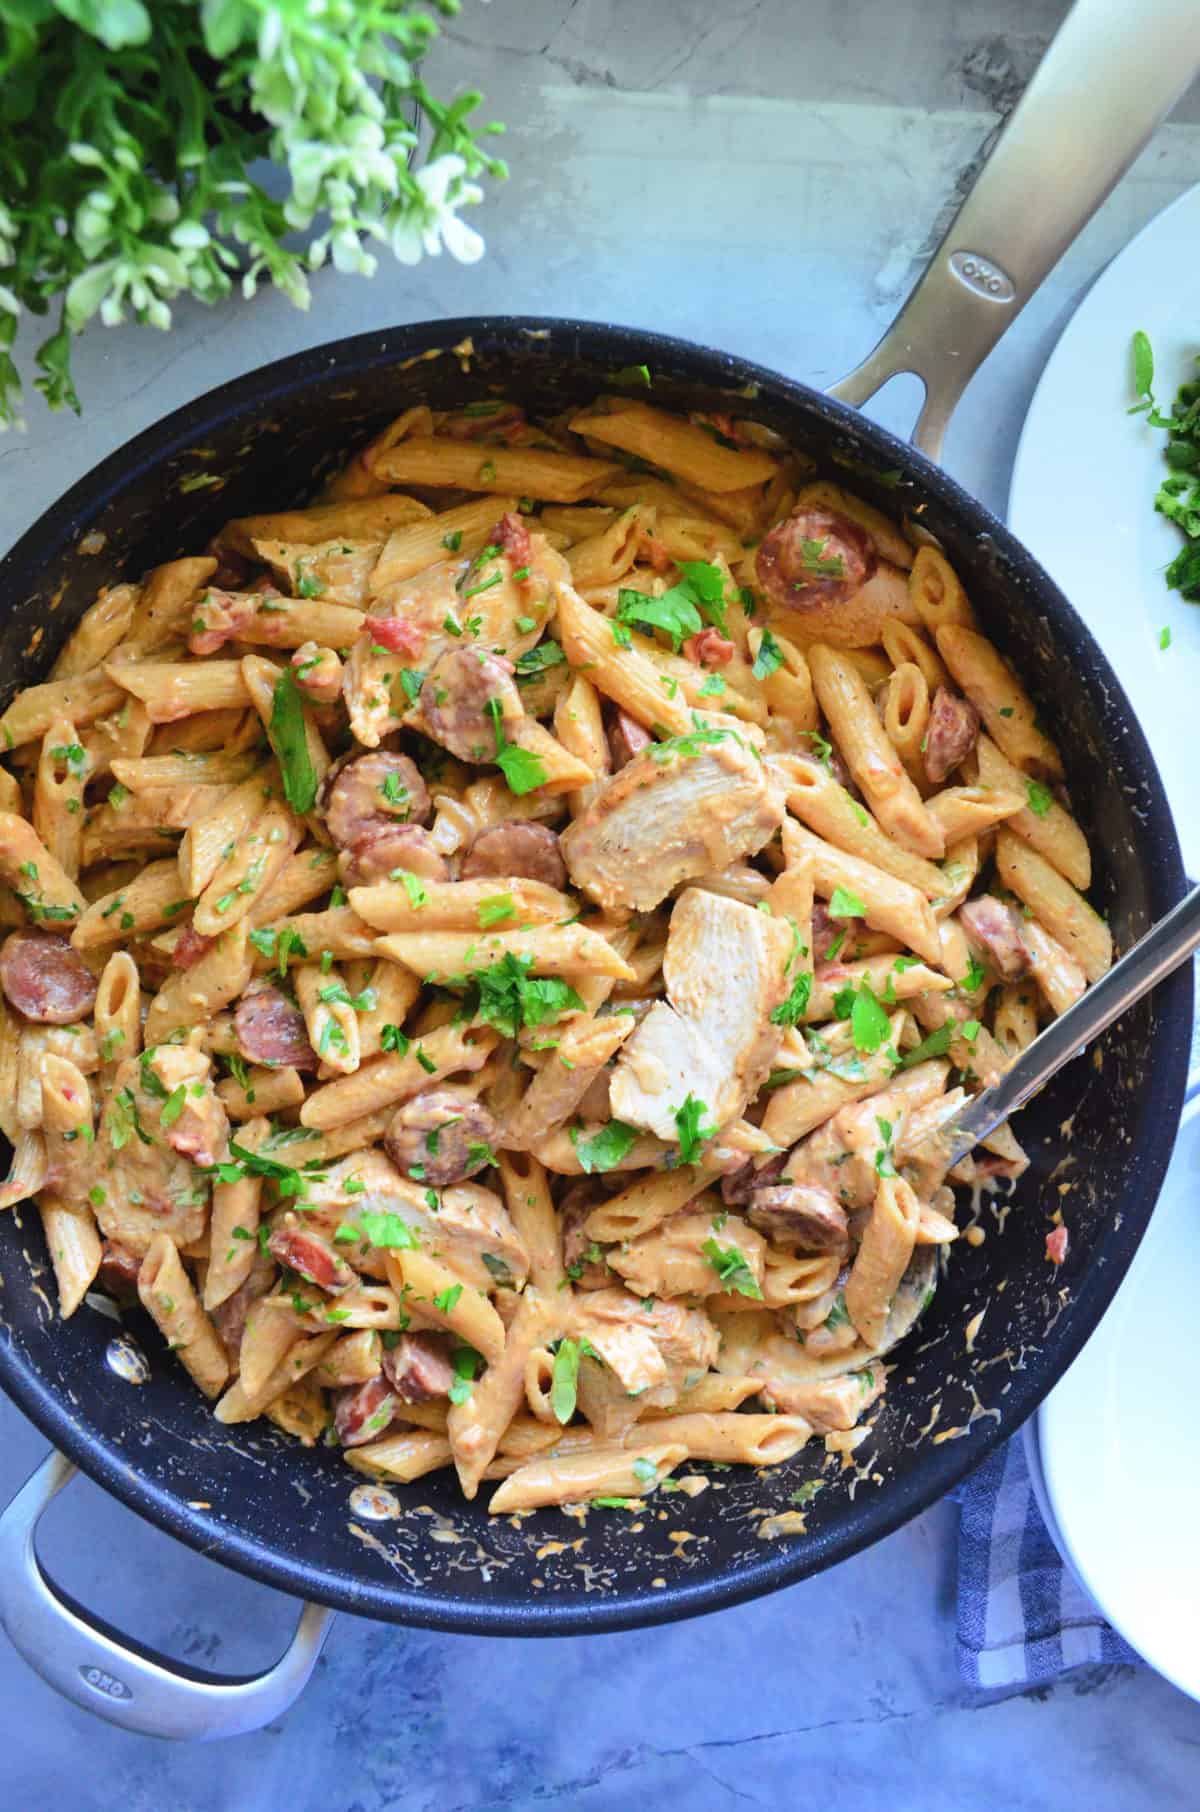 Top view of sliced sausage, penne, green herbs, chicken tossed in light sauce in pan with spoon.